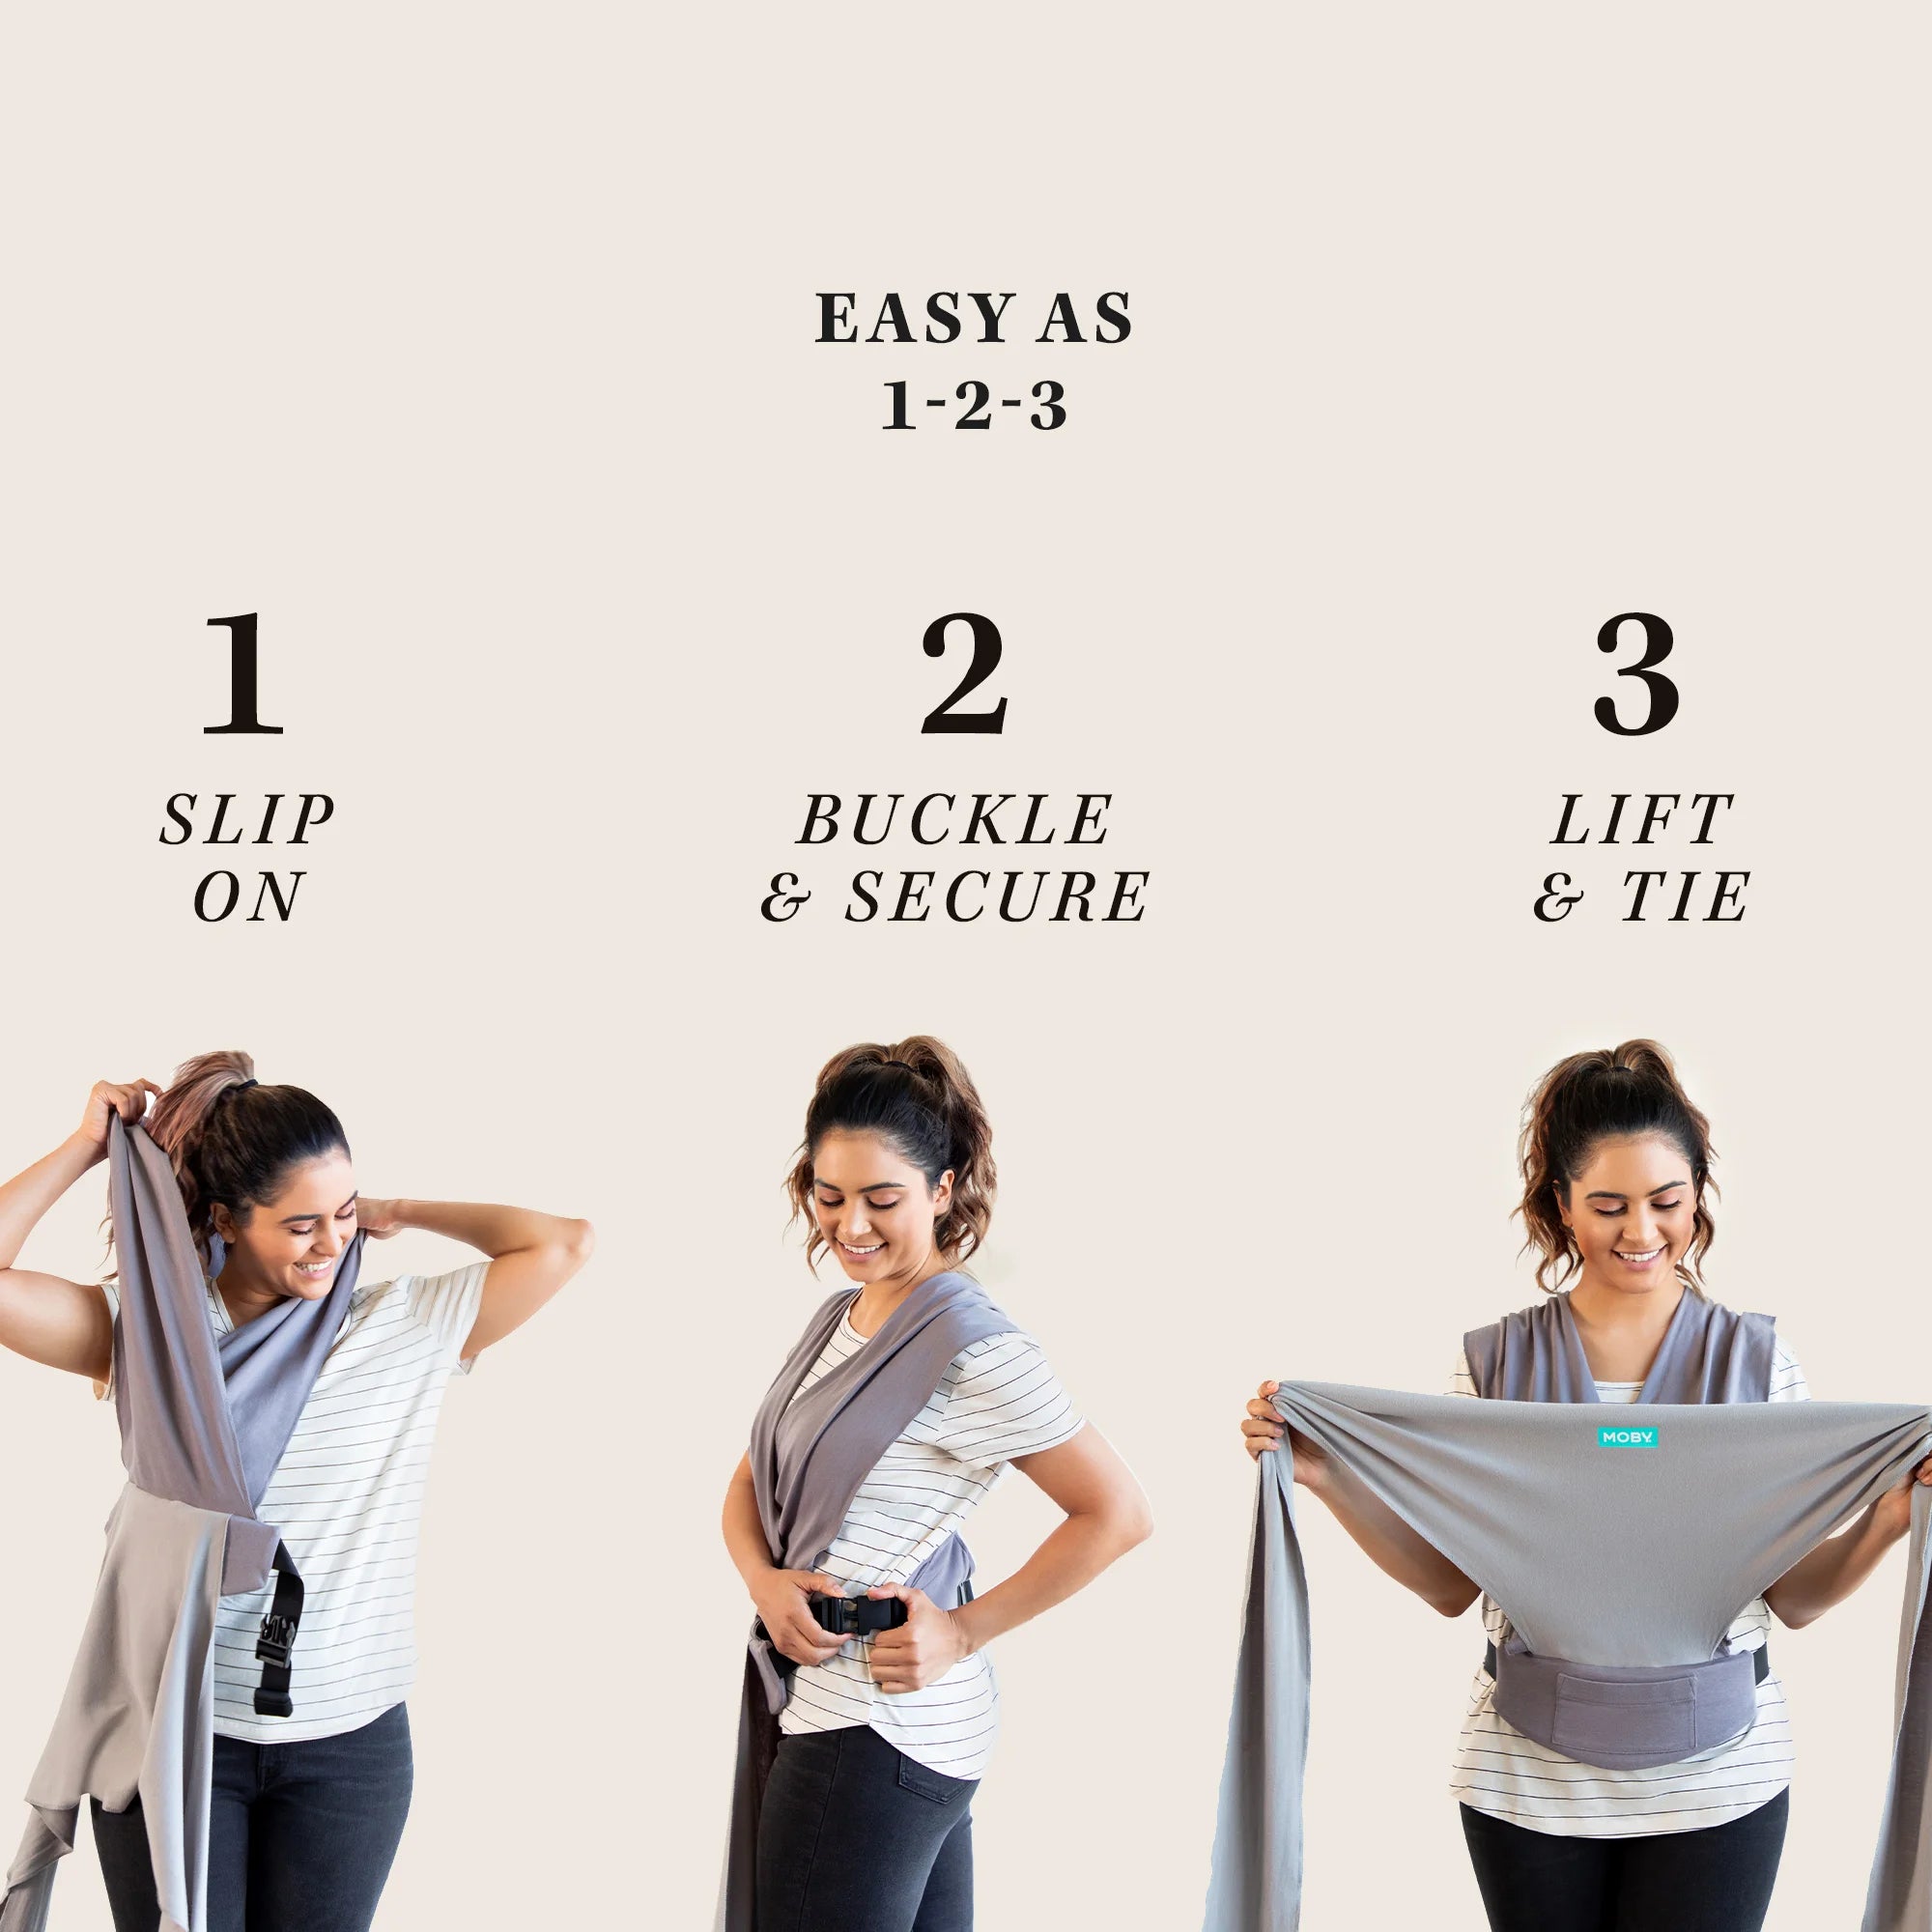 easy as 1-2-3, step 1 slip on, step 2 buckle and secure, step 3 lift and tie